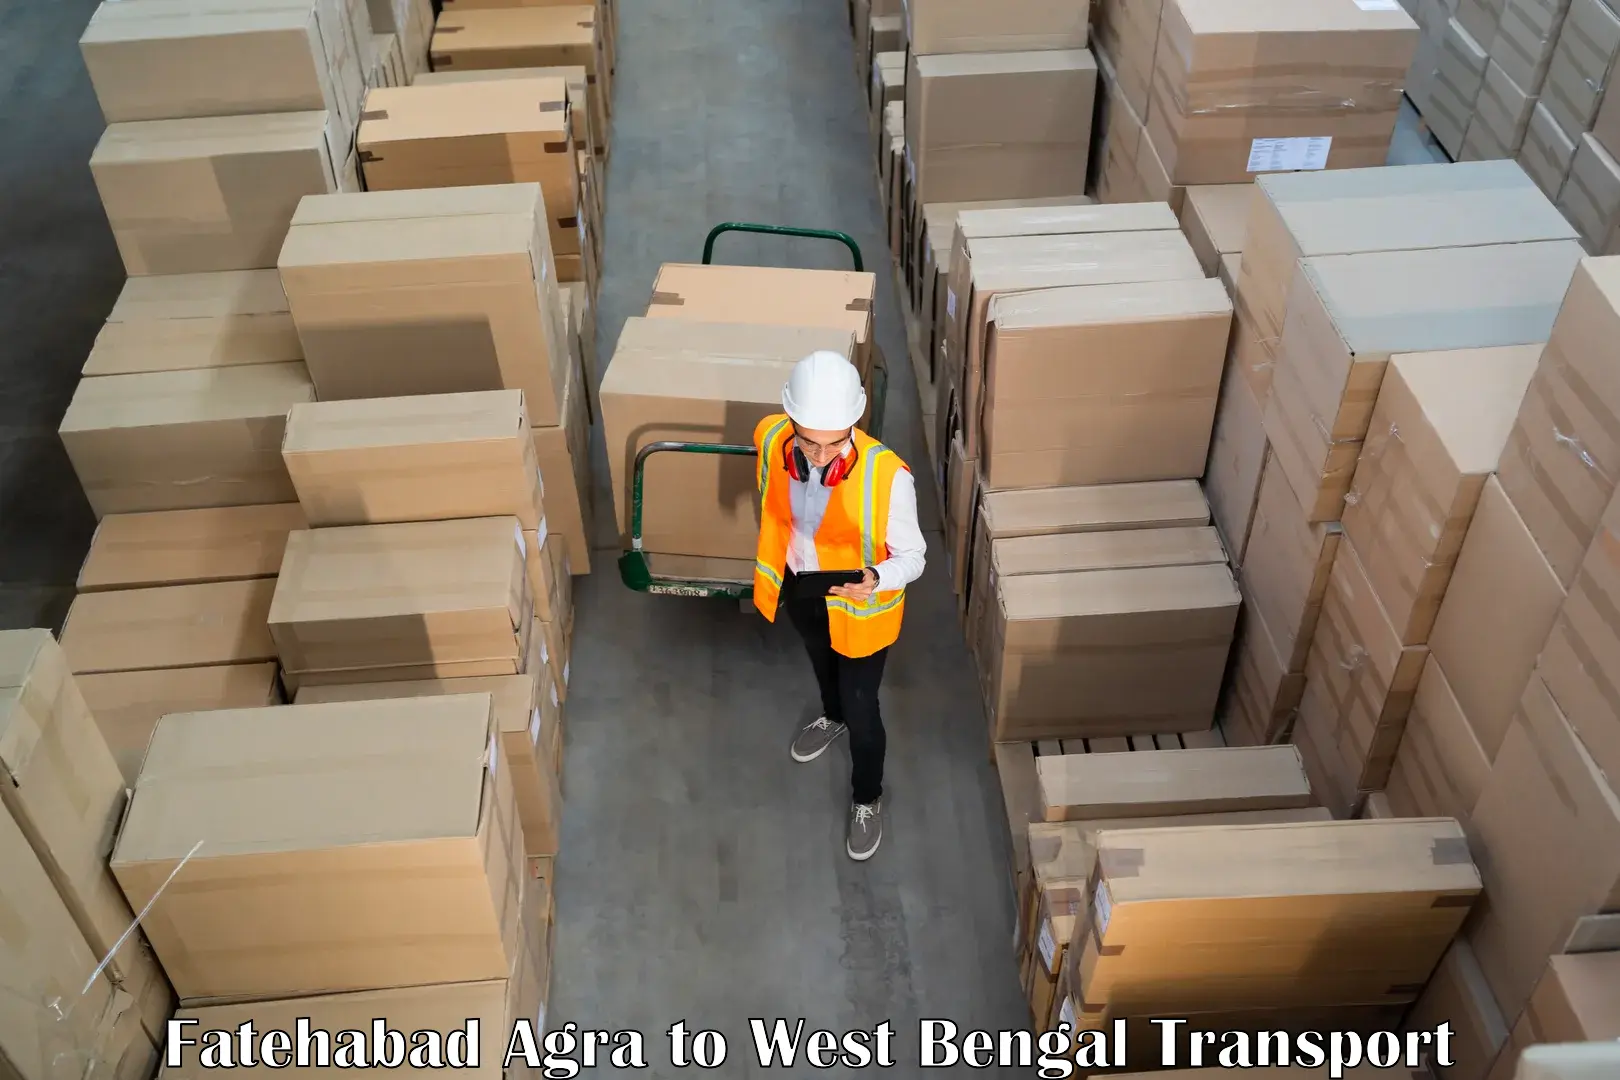 Air cargo transport services in Fatehabad Agra to Kolkata Port